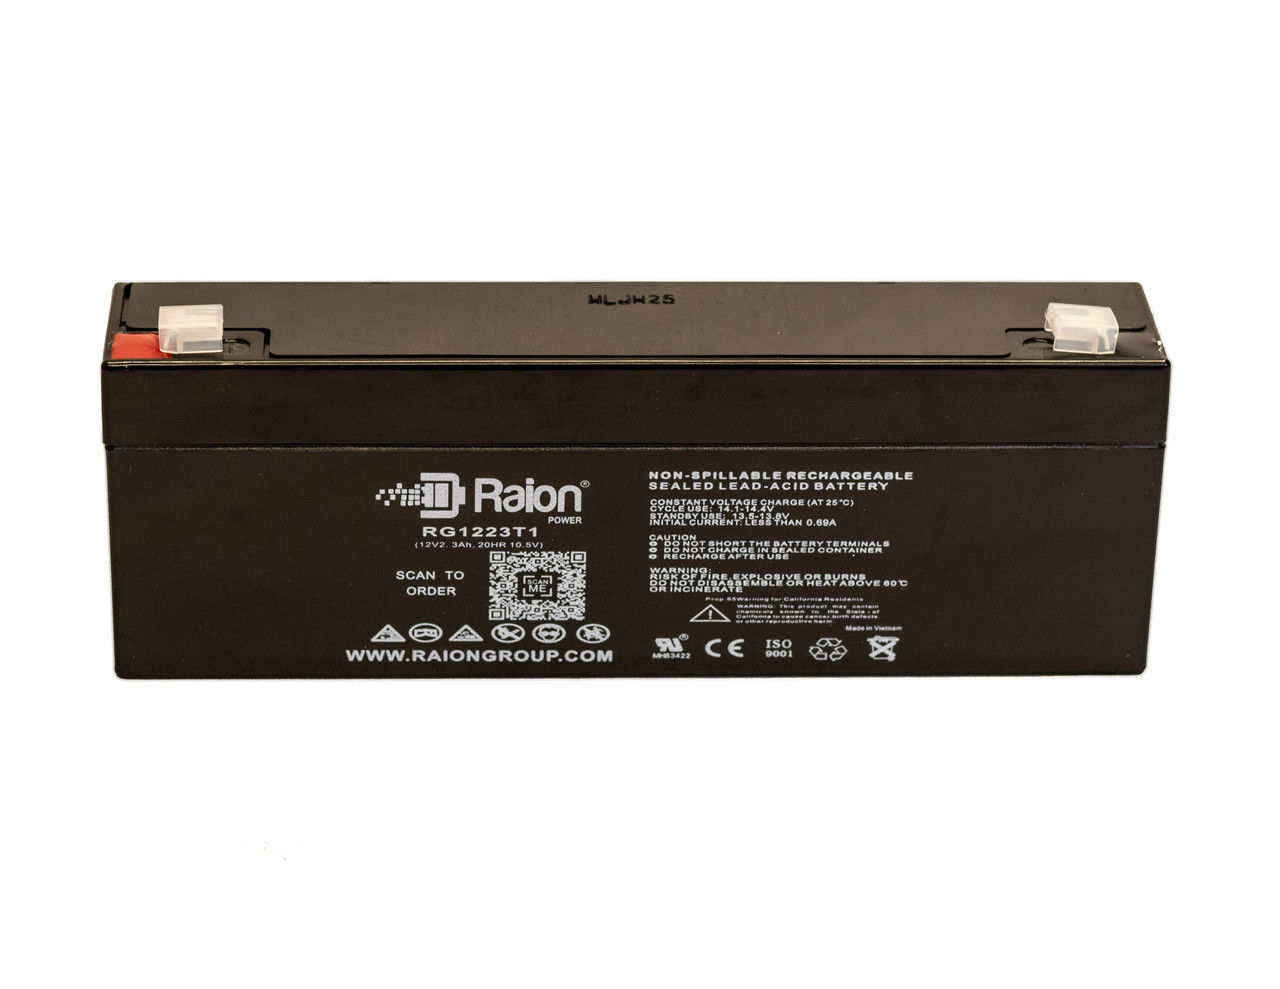 Raion Power 12V 2.3Ah SLA Battery With T1 Terminals For Zimmer ATS 1000 Tourniquet